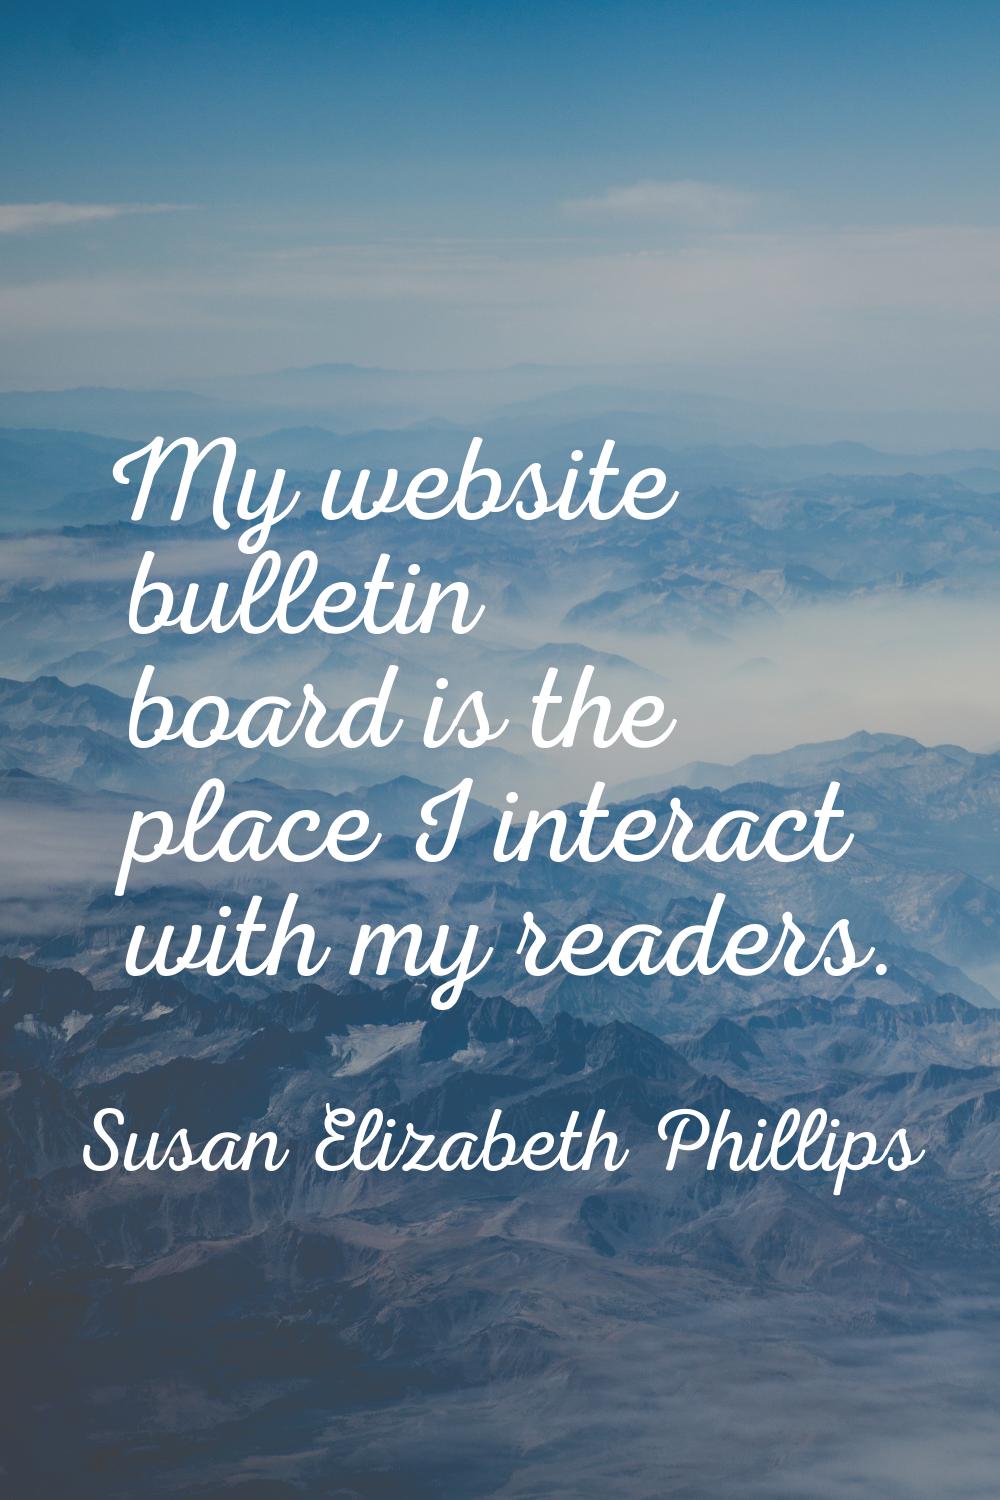 My website bulletin board is the place I interact with my readers.